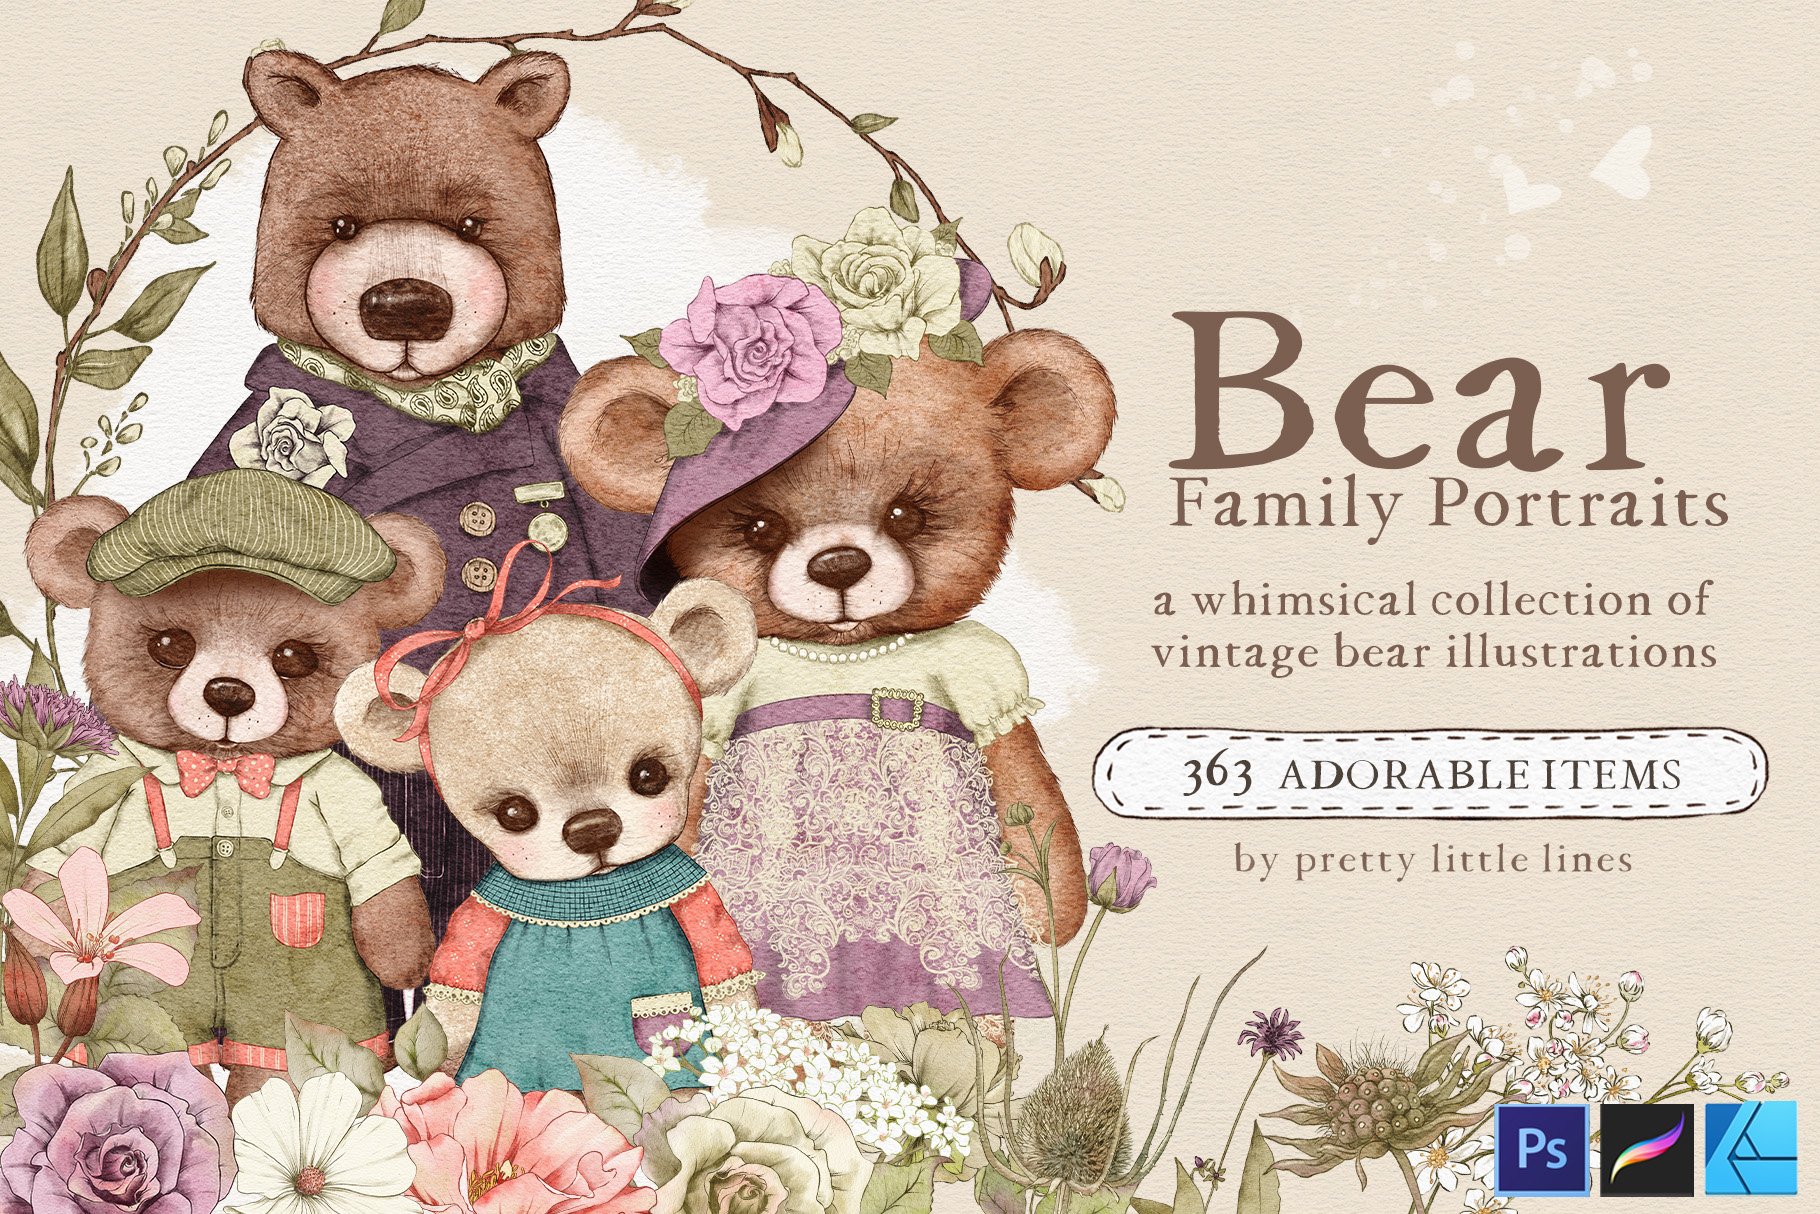 Bear Family Portraits – A Whimsical Collection of Vintage Bear Illustrations